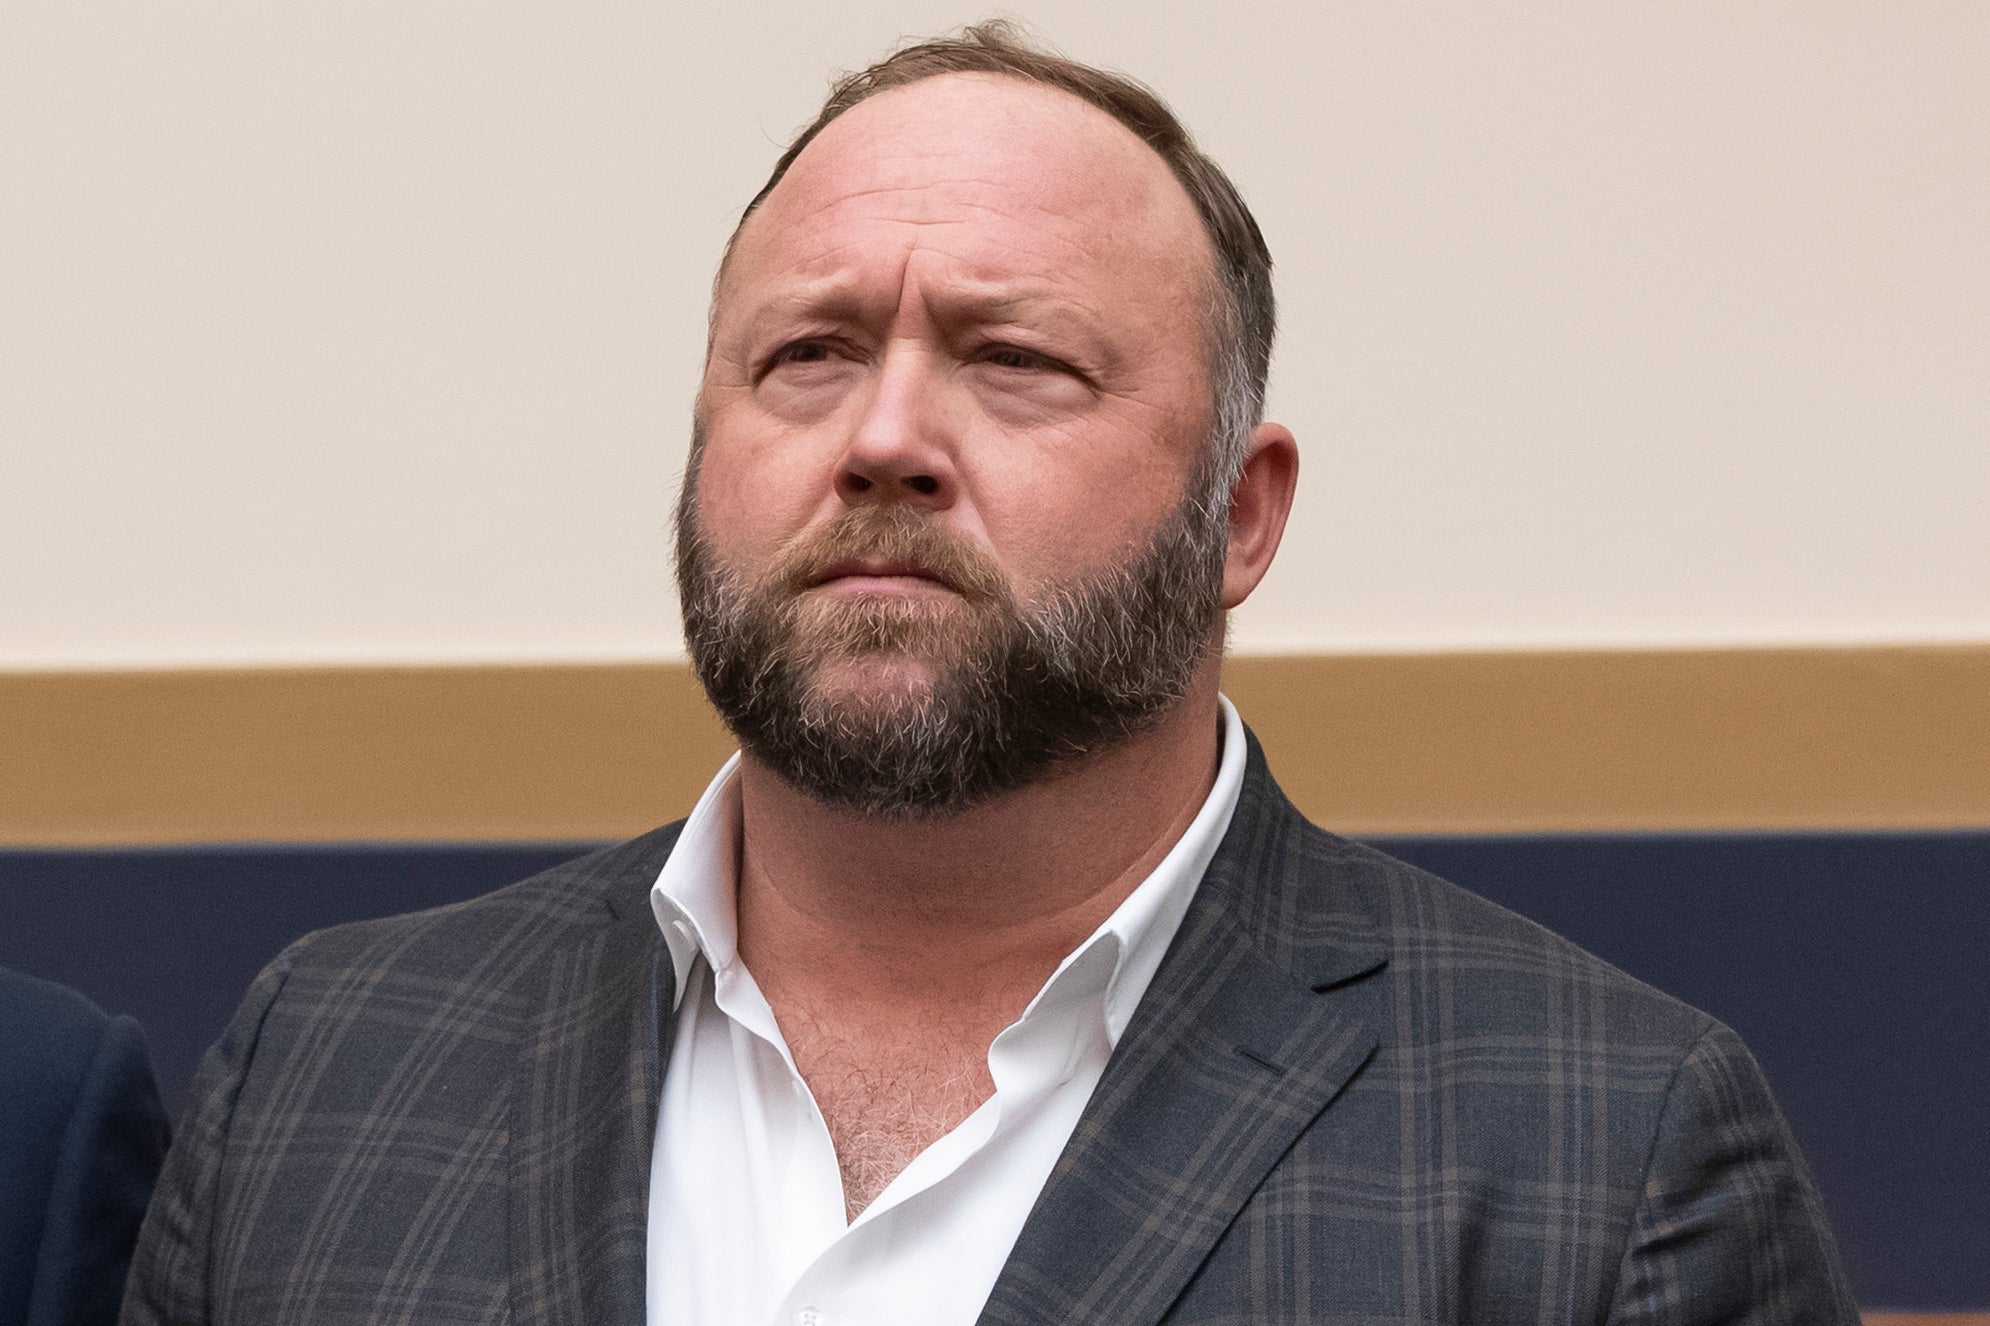 Alex Jones was a no-show on day two of his defamation trial in Austin, Texas